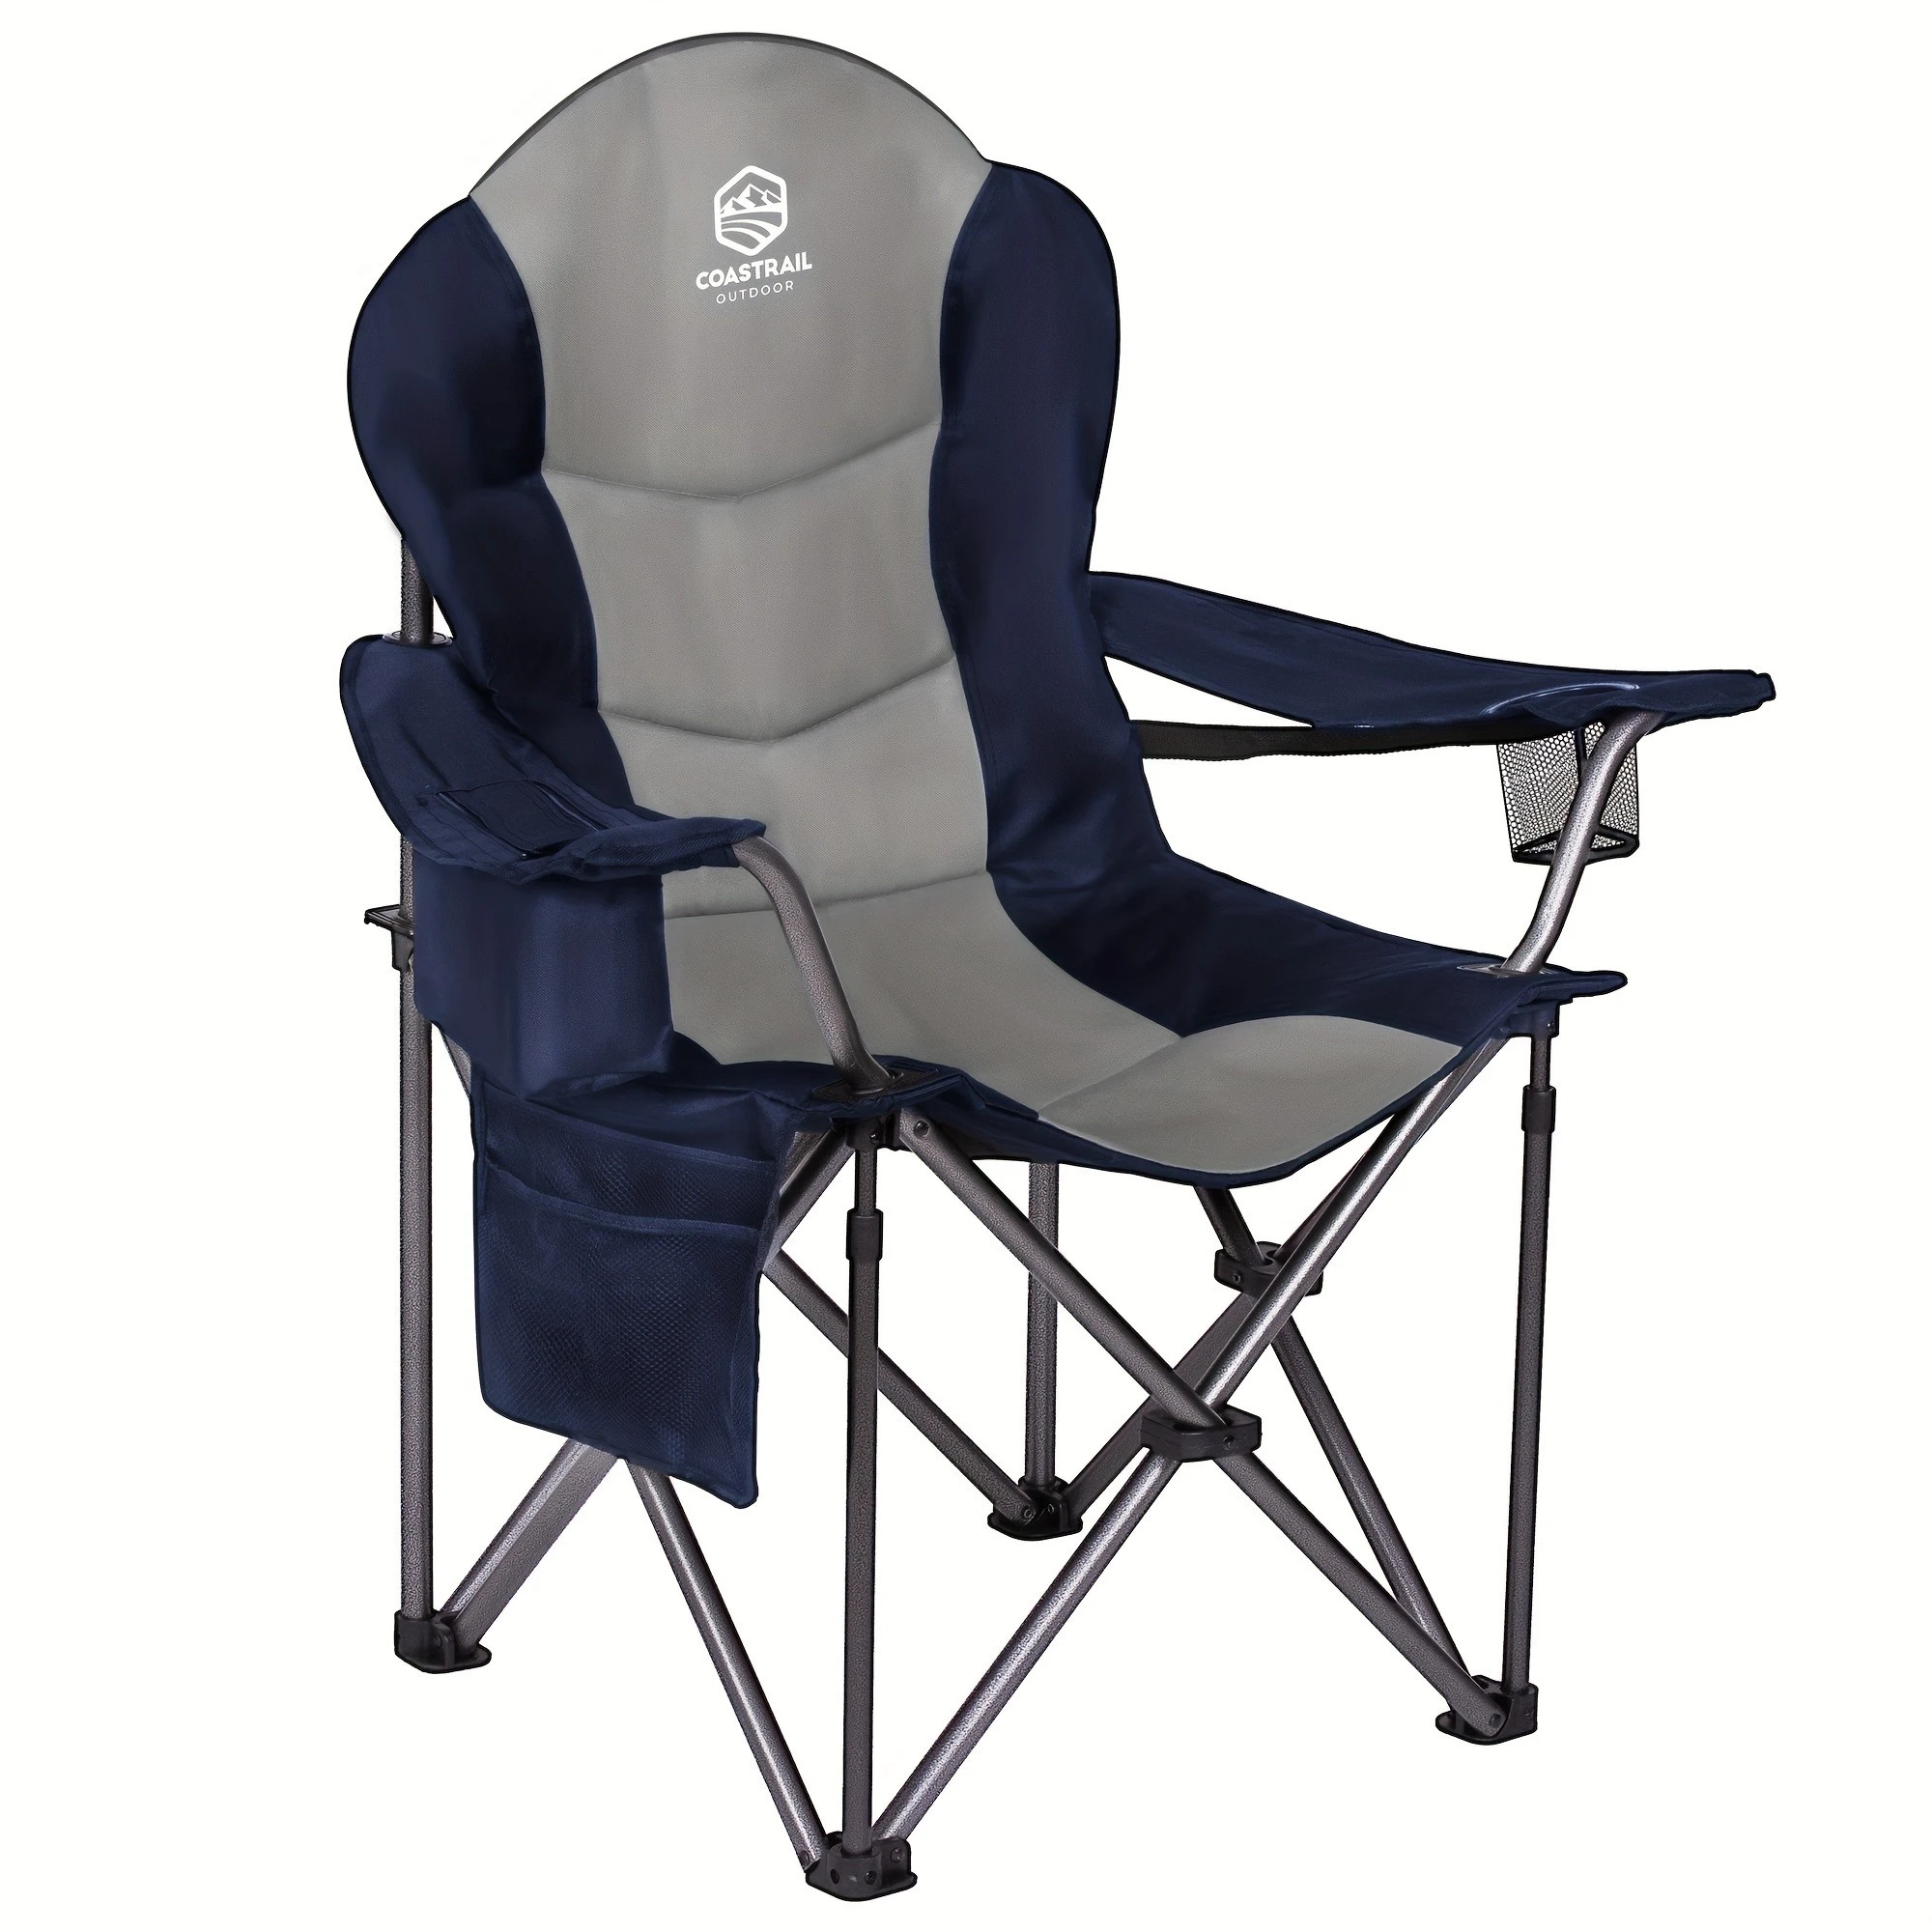 outdoor-camping-is-convenient-to-carry-with-multiple-capacity-folding-chairs